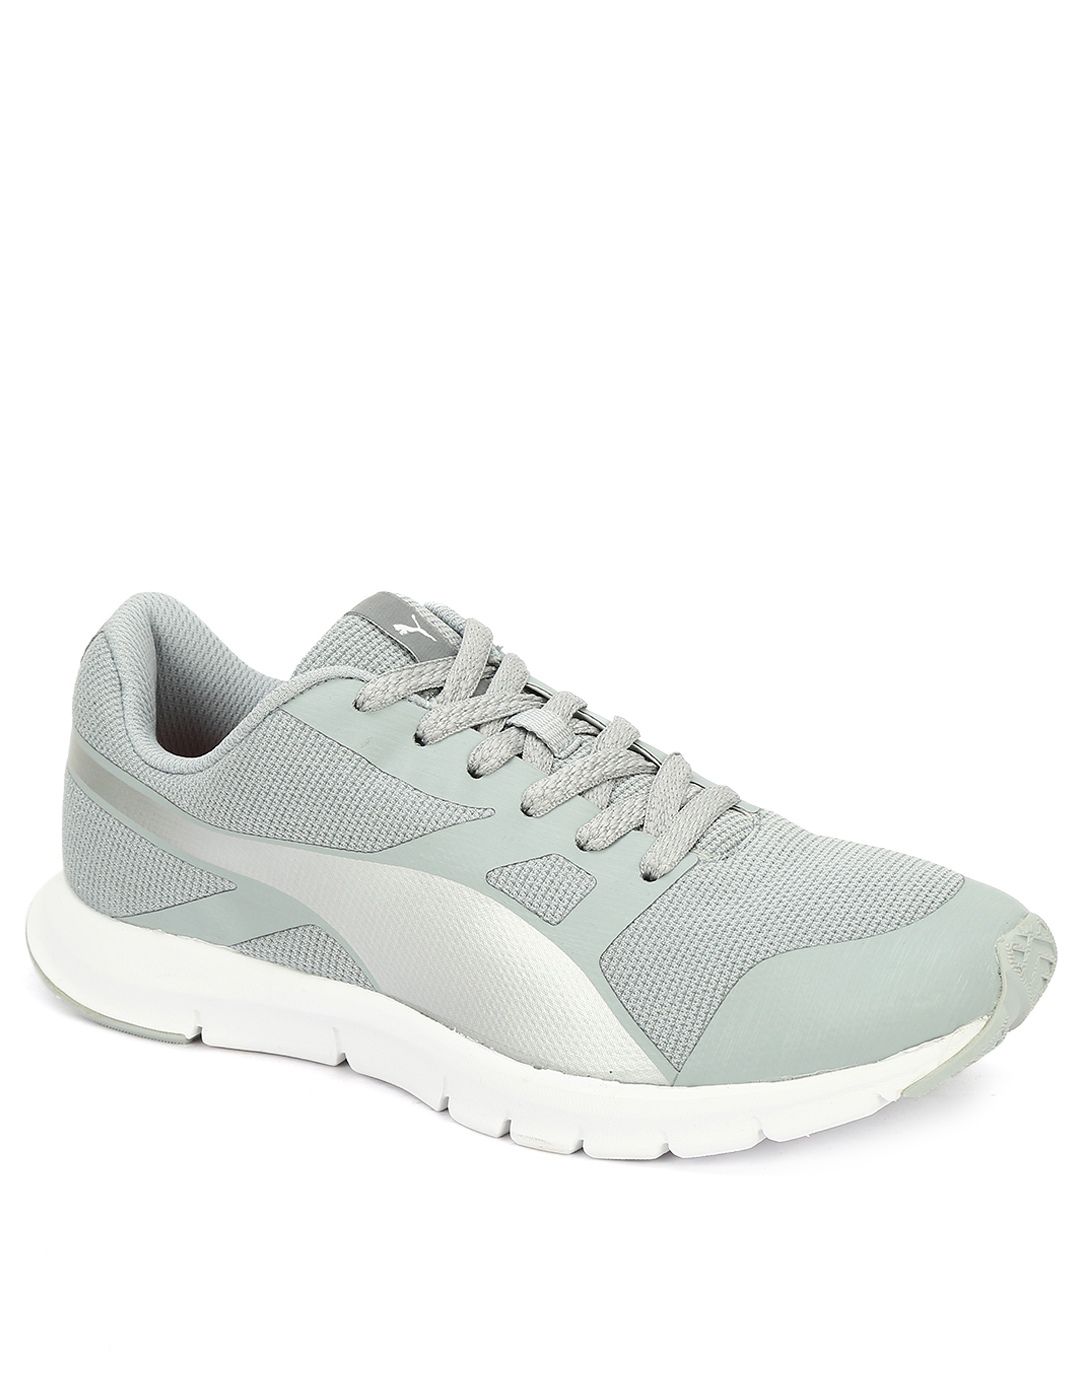 Puma White Sports Shoes Price in India- Buy Puma White Sports Shoes ...